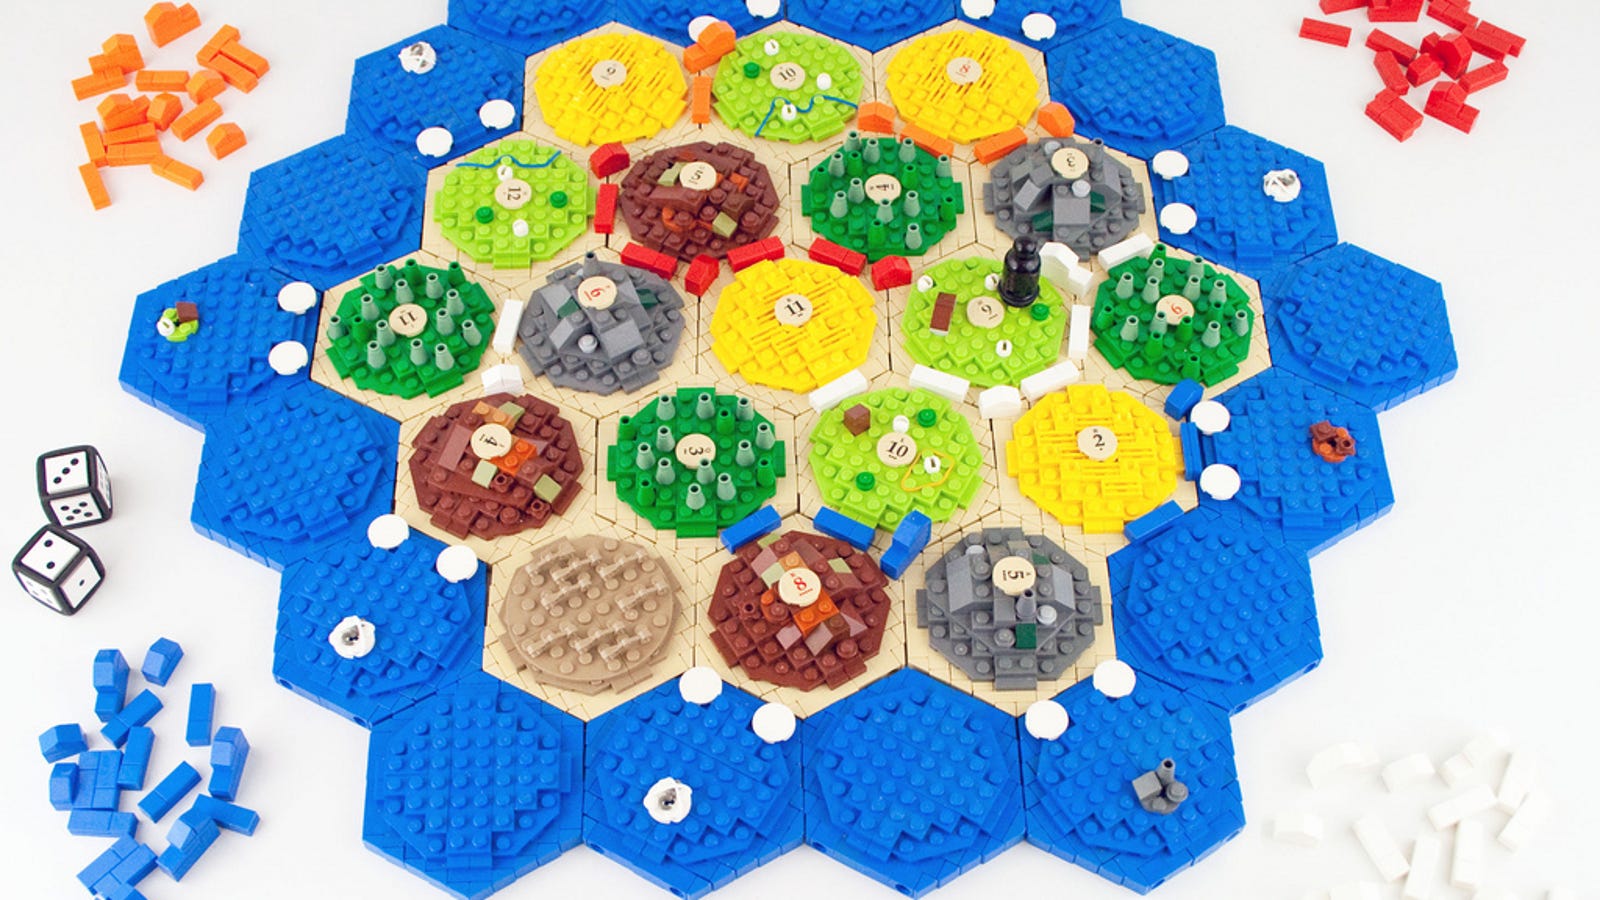 Homemade Settlers of Catan board game turns your sheep